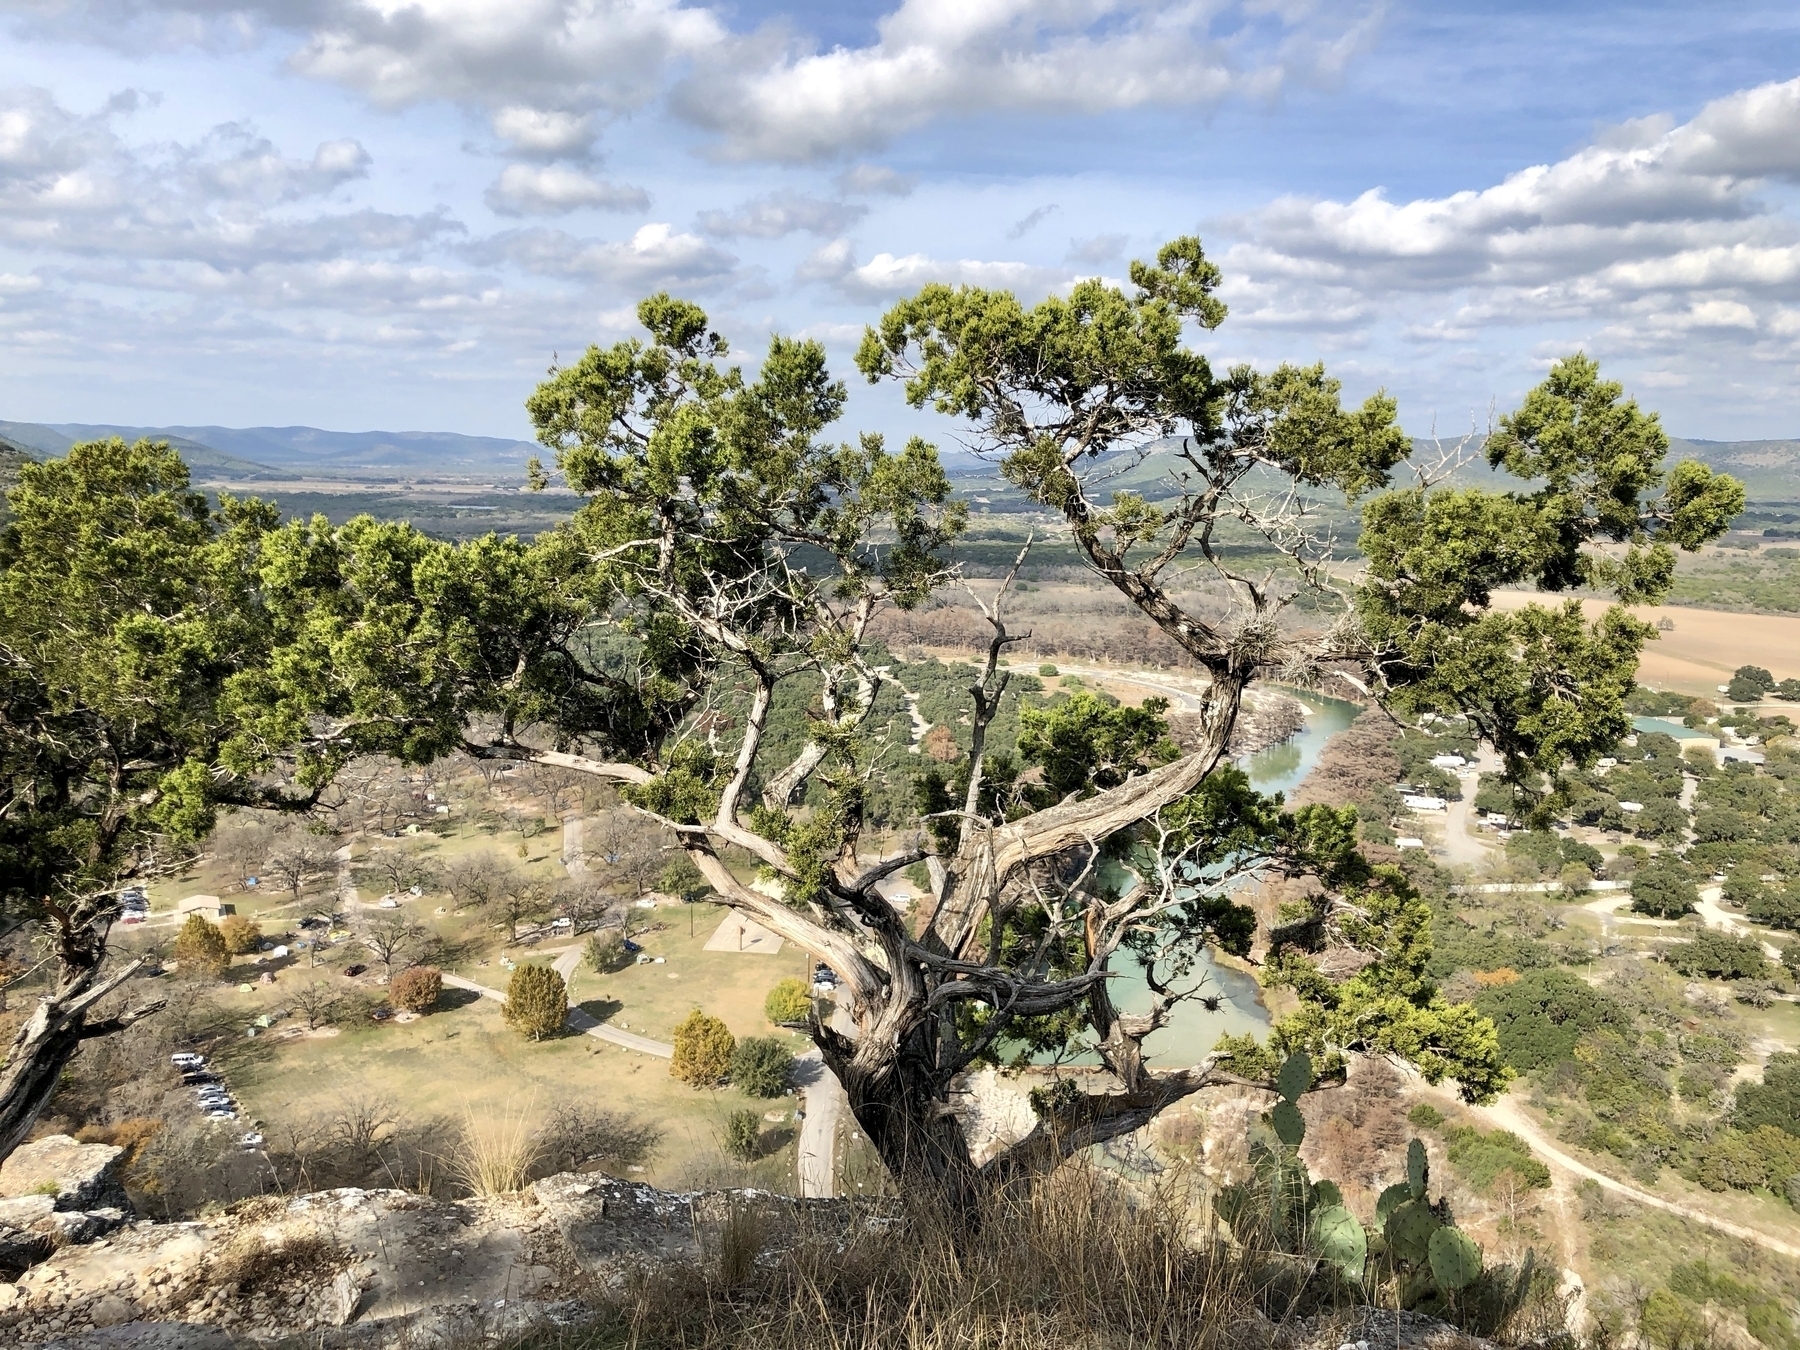 A sparse tree with twisted branches on a hillside overlooking grasslands under a blue sky.